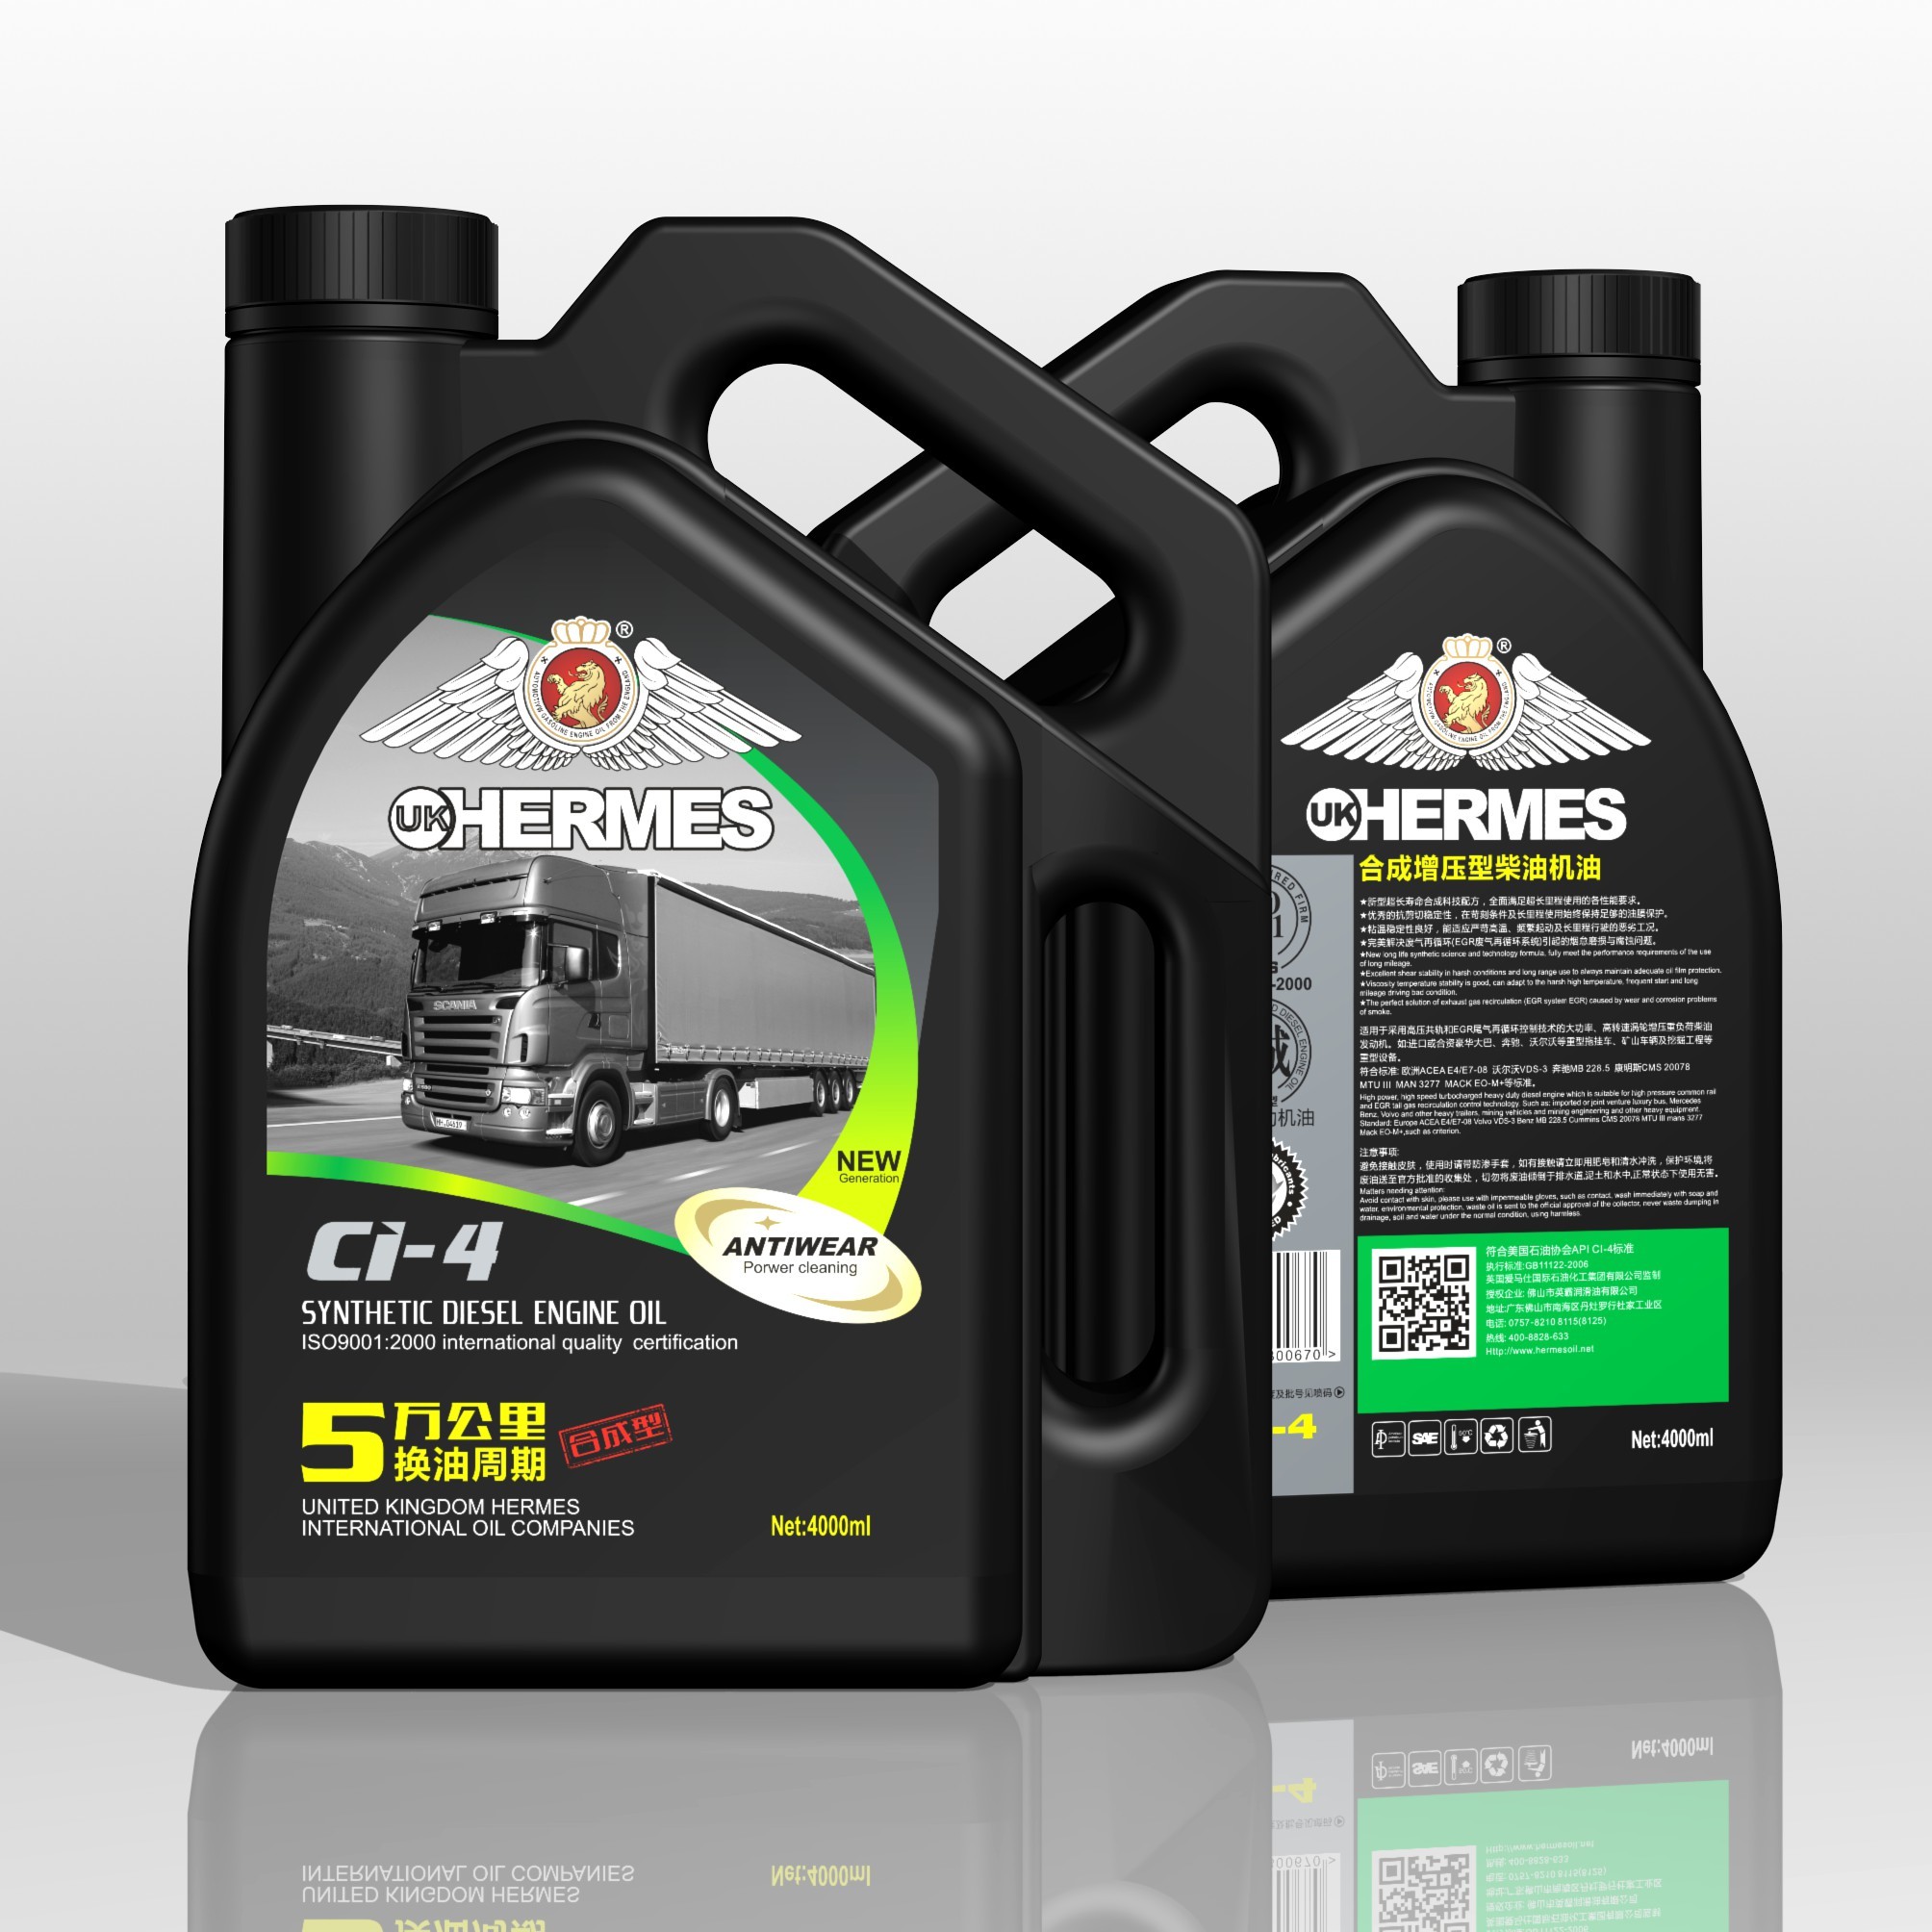 (50,000 km) Long mileage supercharged diesel engine oil (CI-4)